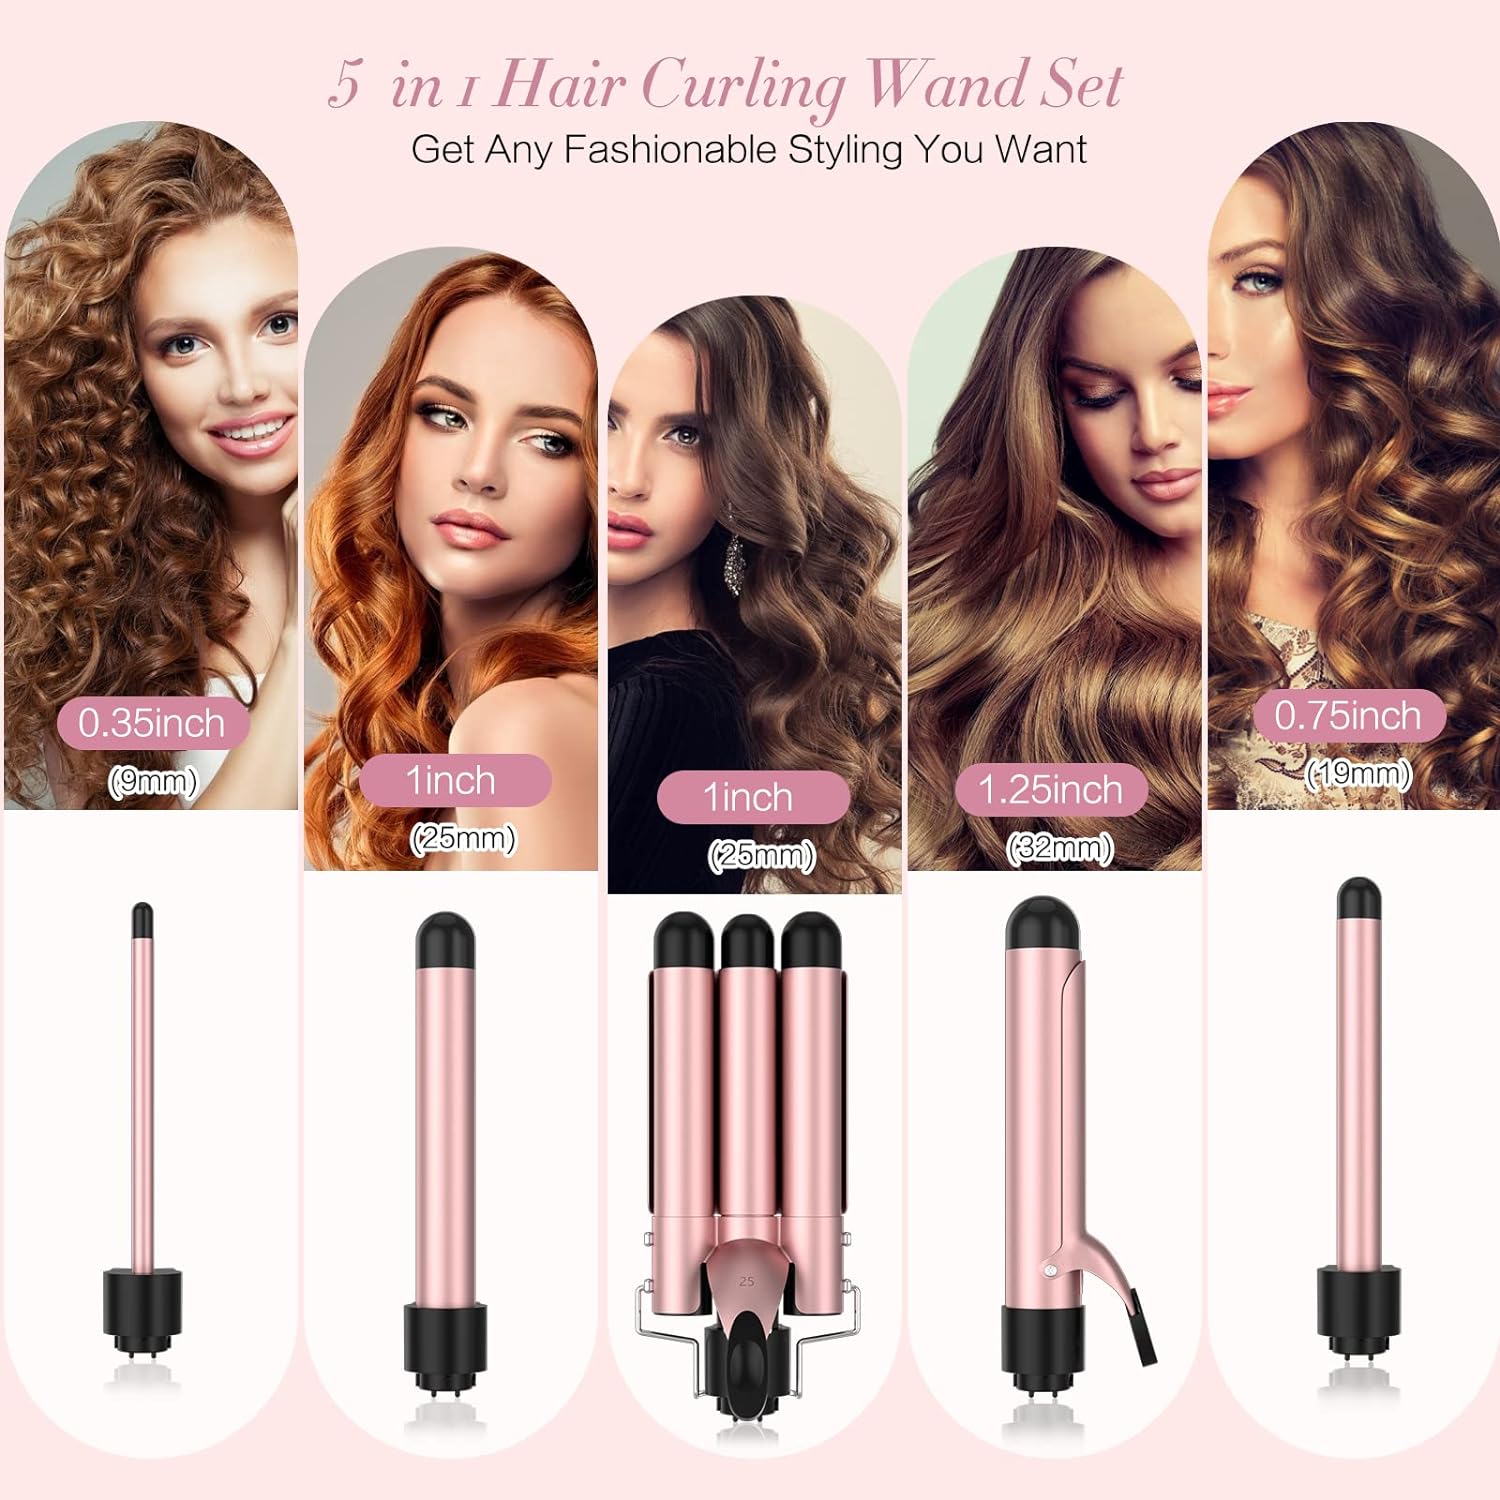 Curling Iron, 5 in 1 Curling Wand Set with 3 Barrel Hair Crimper Hair Tool & 4 Interchangeable Ceramic Curling Wand(0.35”-1.25”),